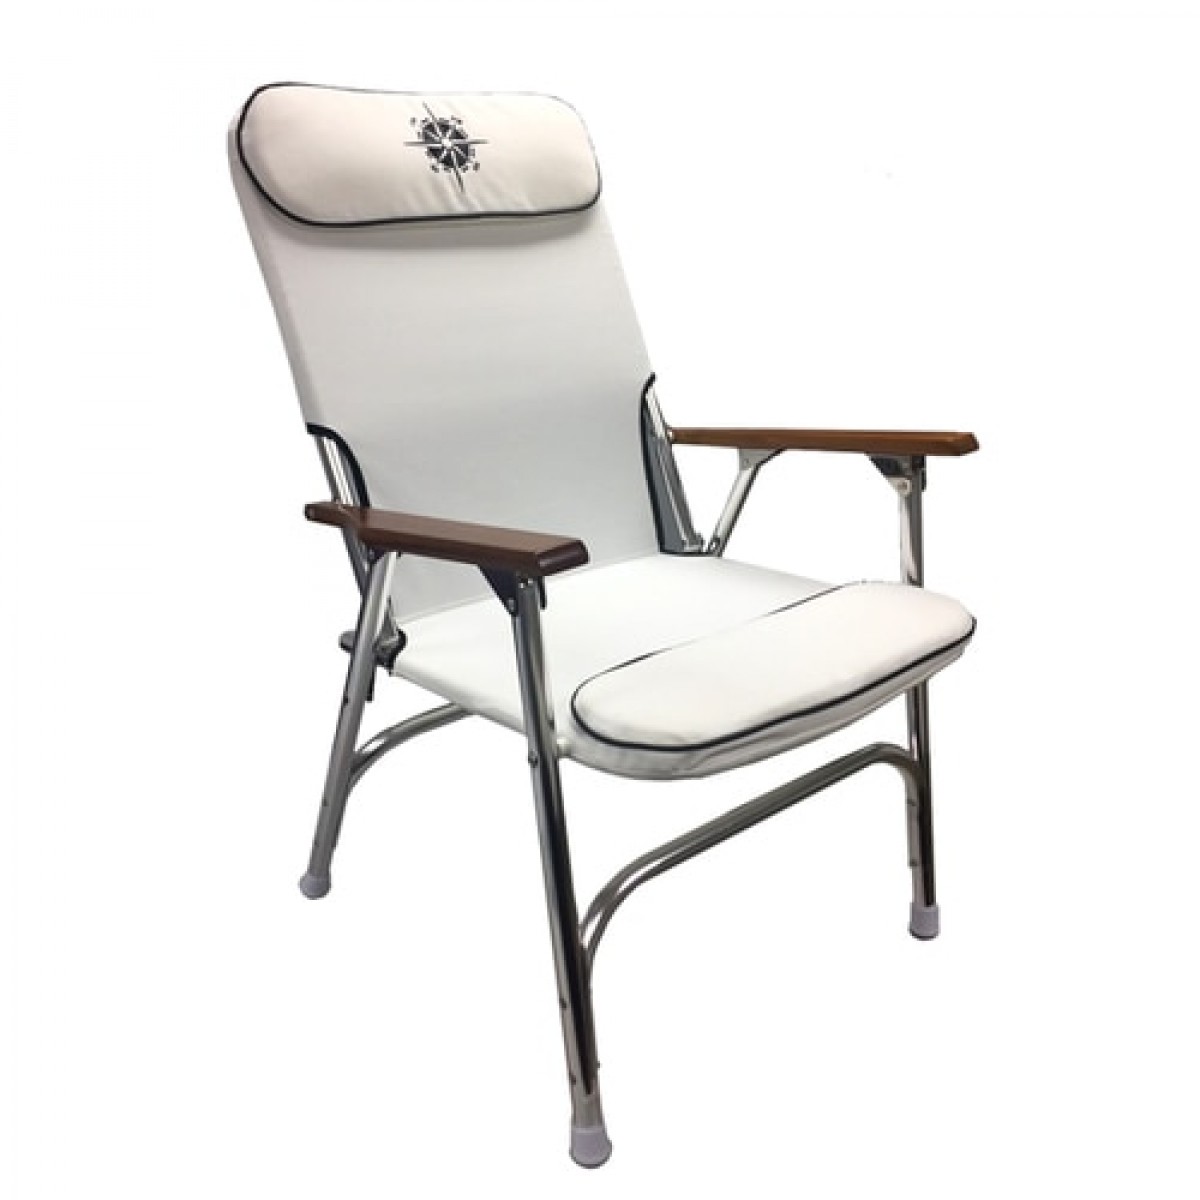 Padded Folding Deck Chair White - bc-25-5